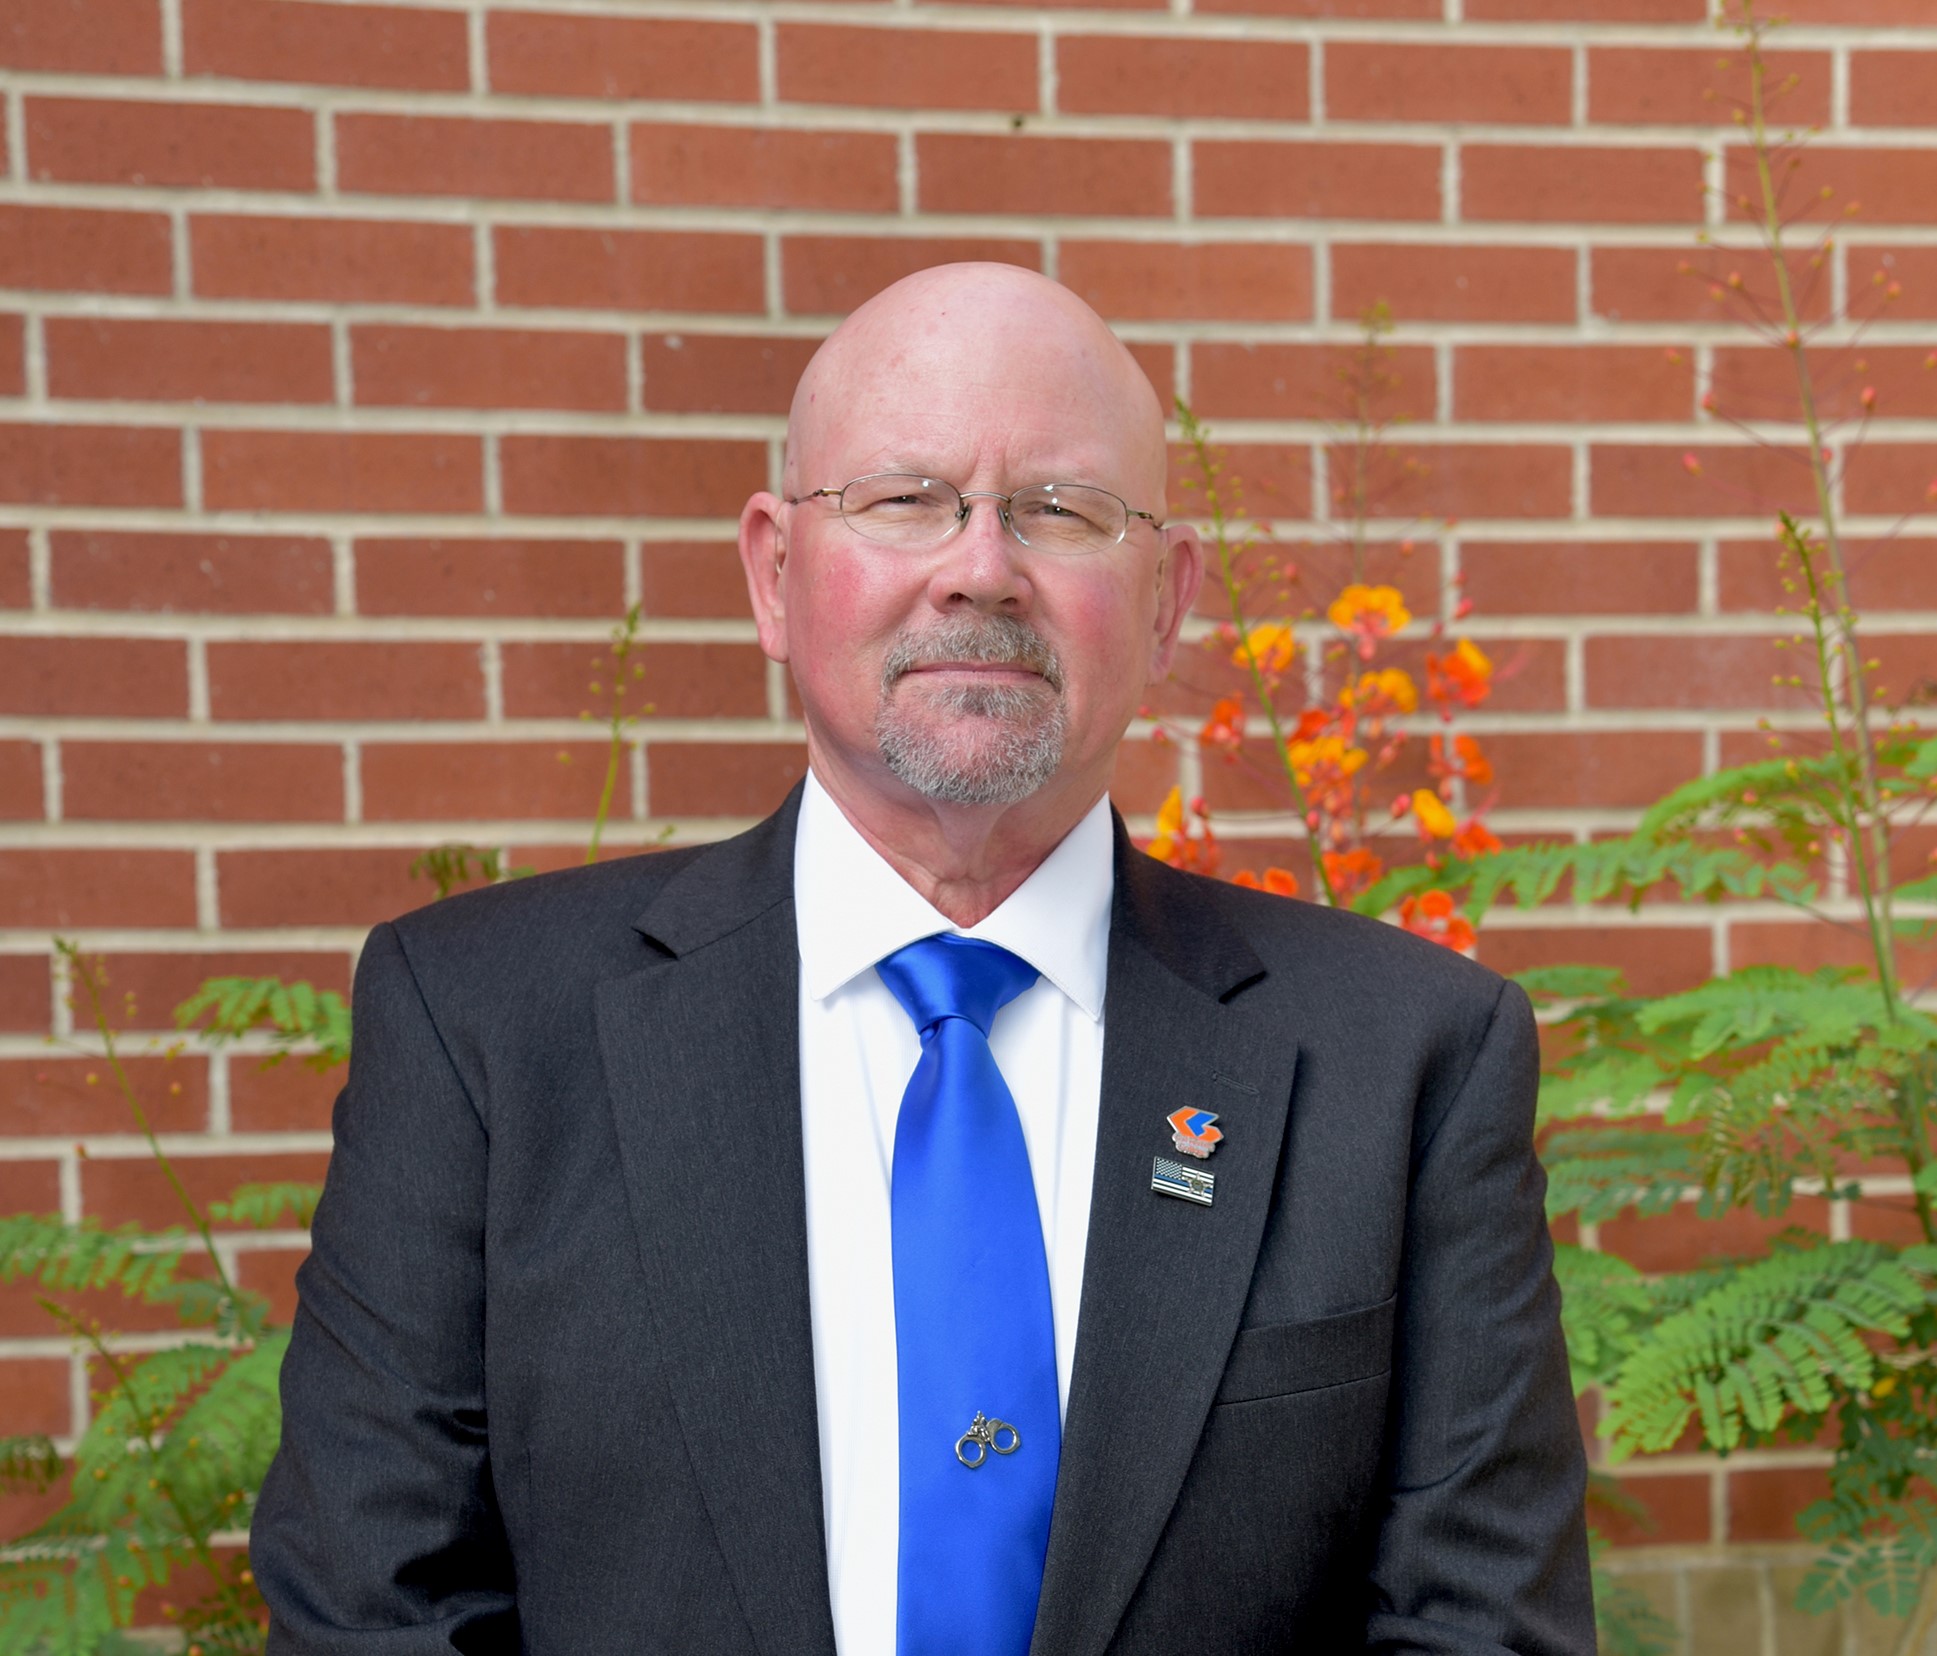 Galveston College promotes instructor Barton Stephenson to Director of the Galveston College Law Enforcement Academy.